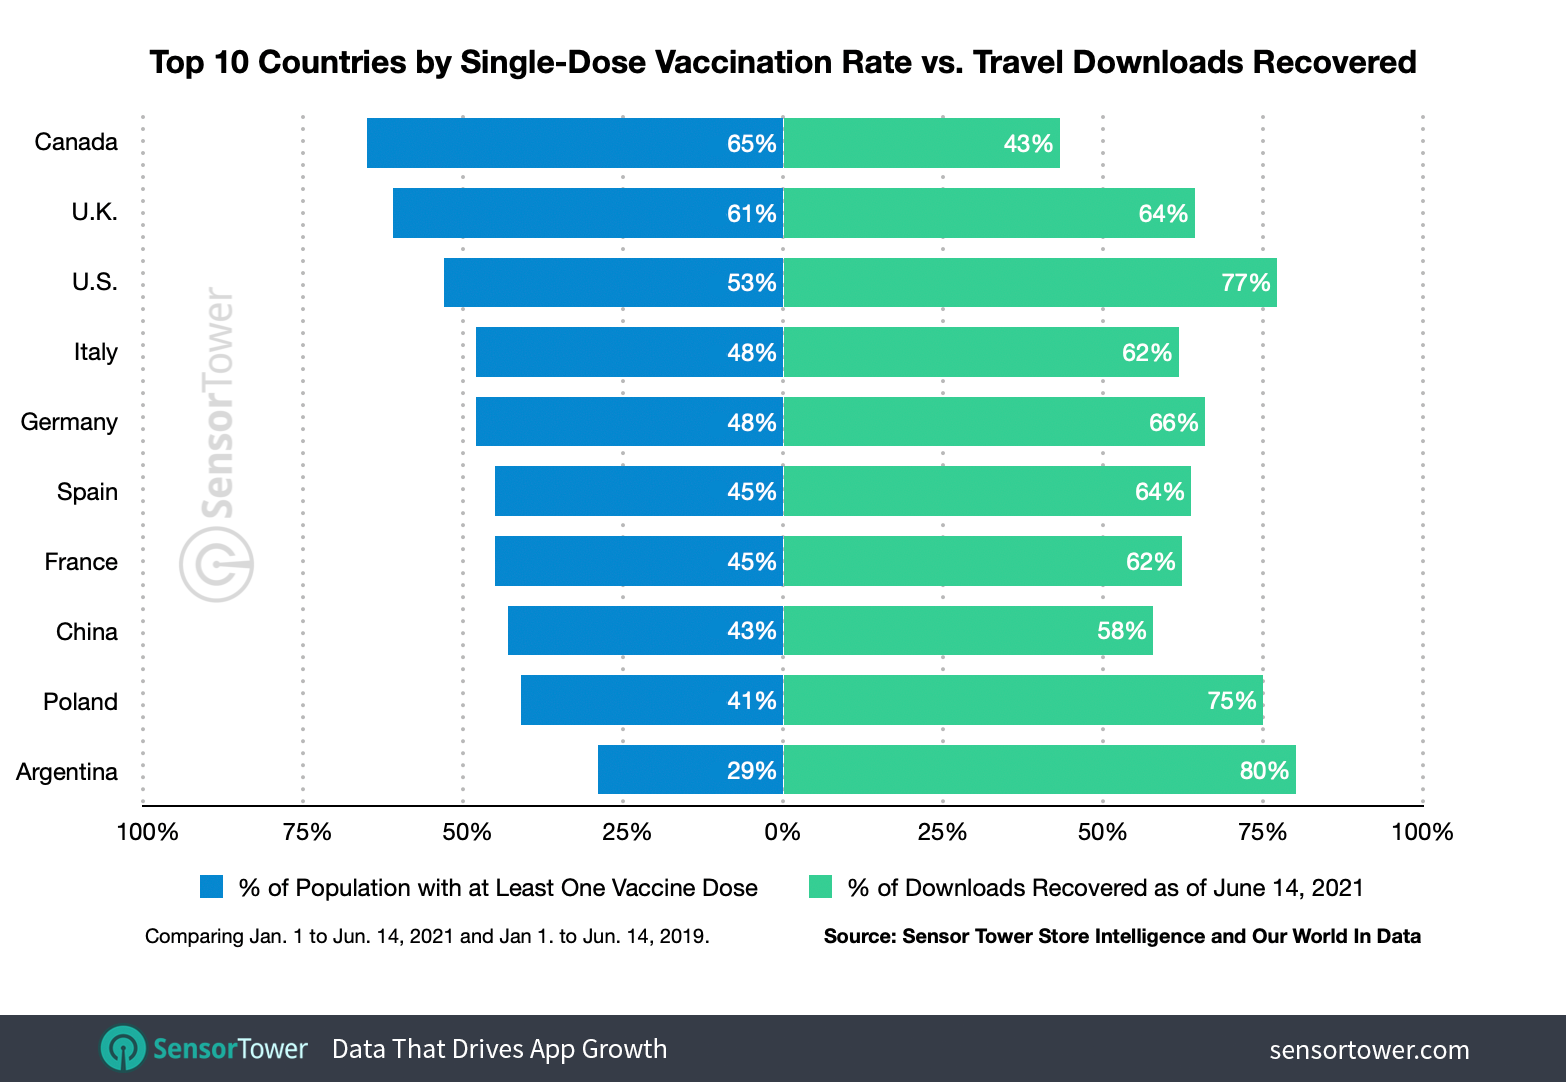 COVID-19 vaccination rates don't necessarily correspond with the resurgence of travel app installs in each country.